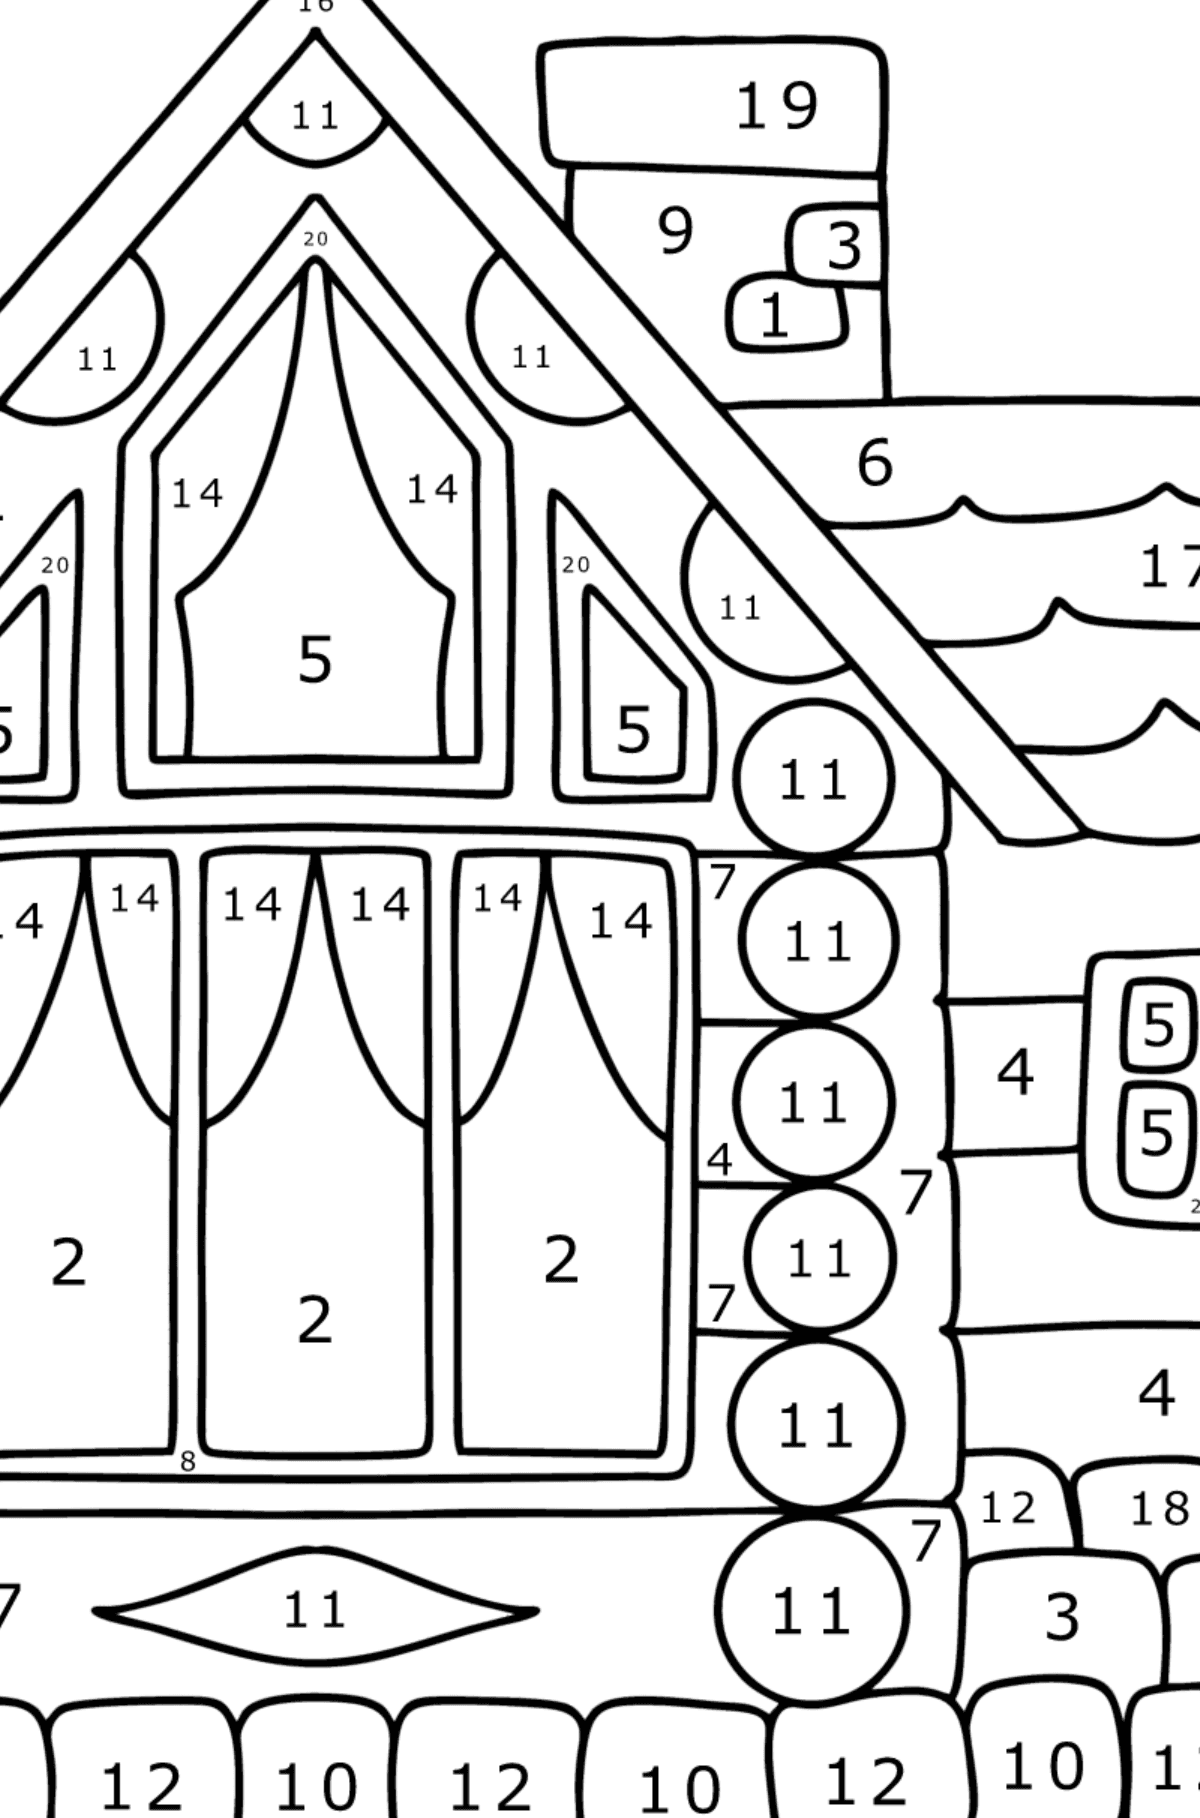 Log Cabin in Wood coloring page - Coloring by Numbers for Kids